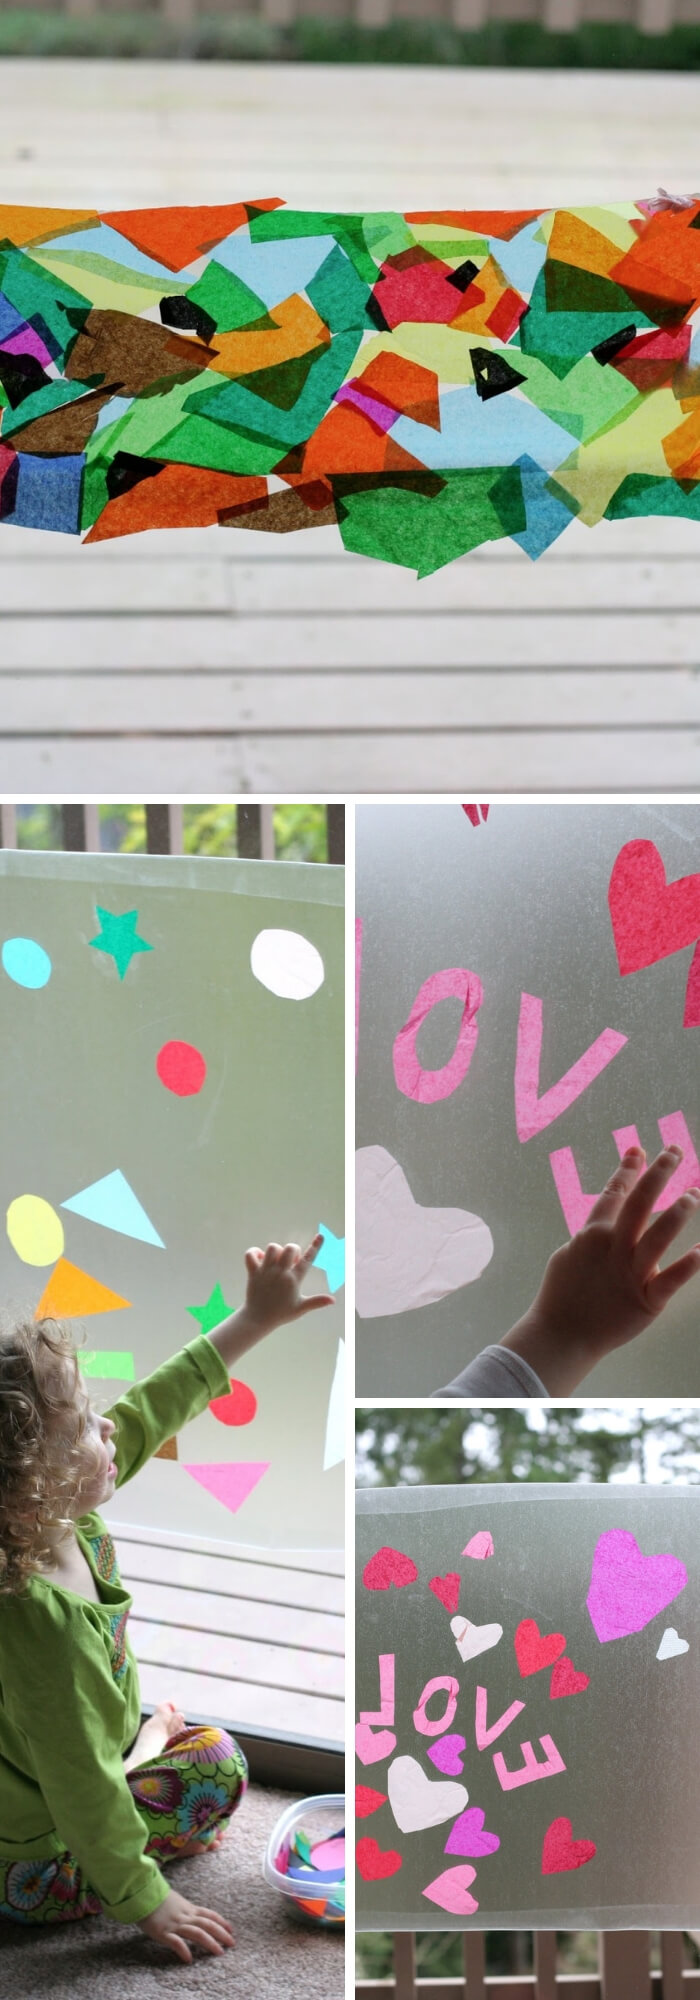 Children's Holiday Craft Ideas – Faux Stained Glass Valentine's Day Window Hangings | Contact Paper Window Art